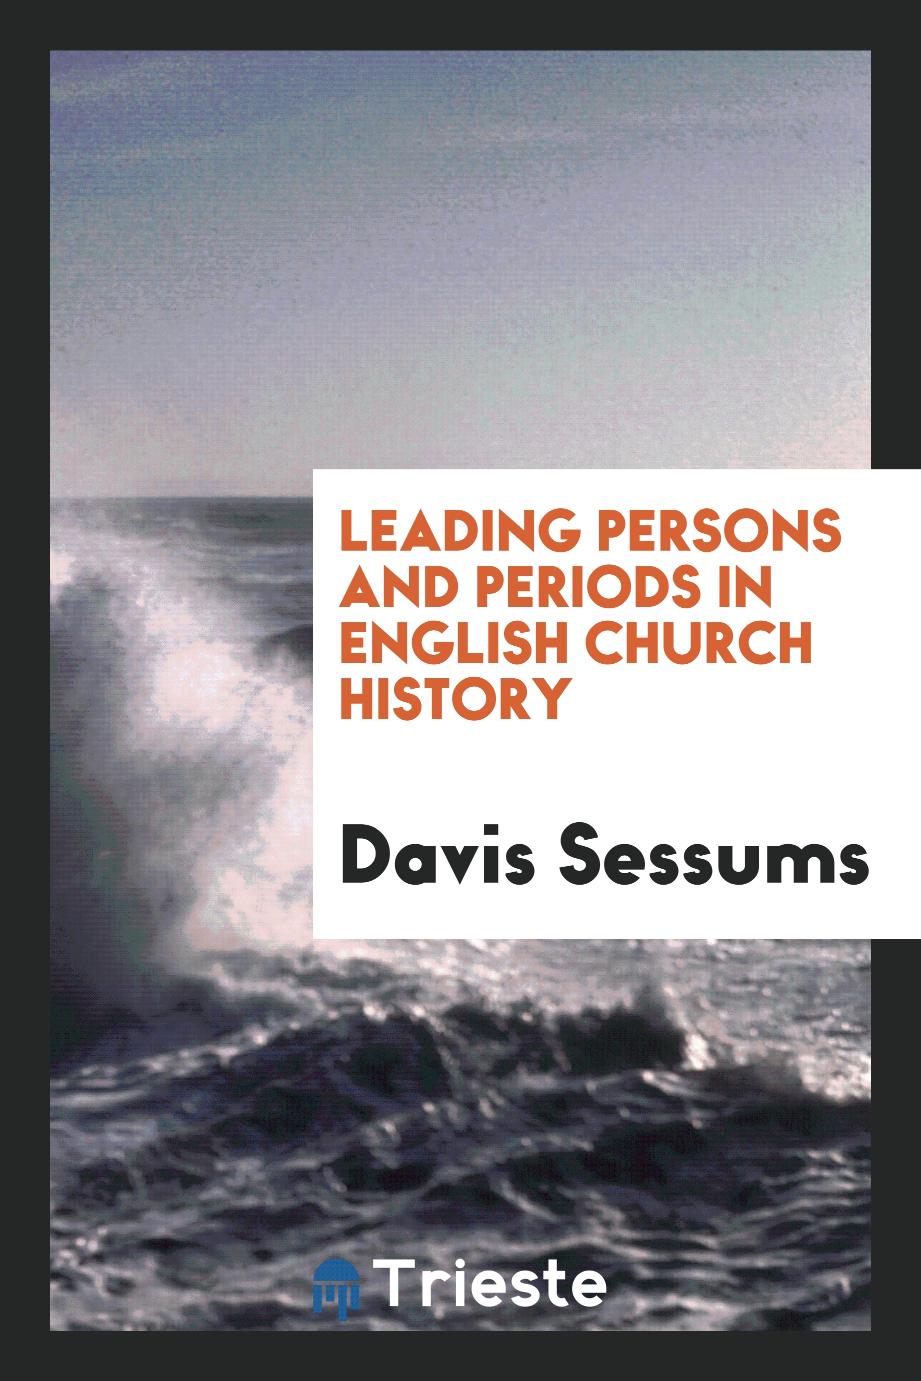 Leading Persons and Periods in English Church History